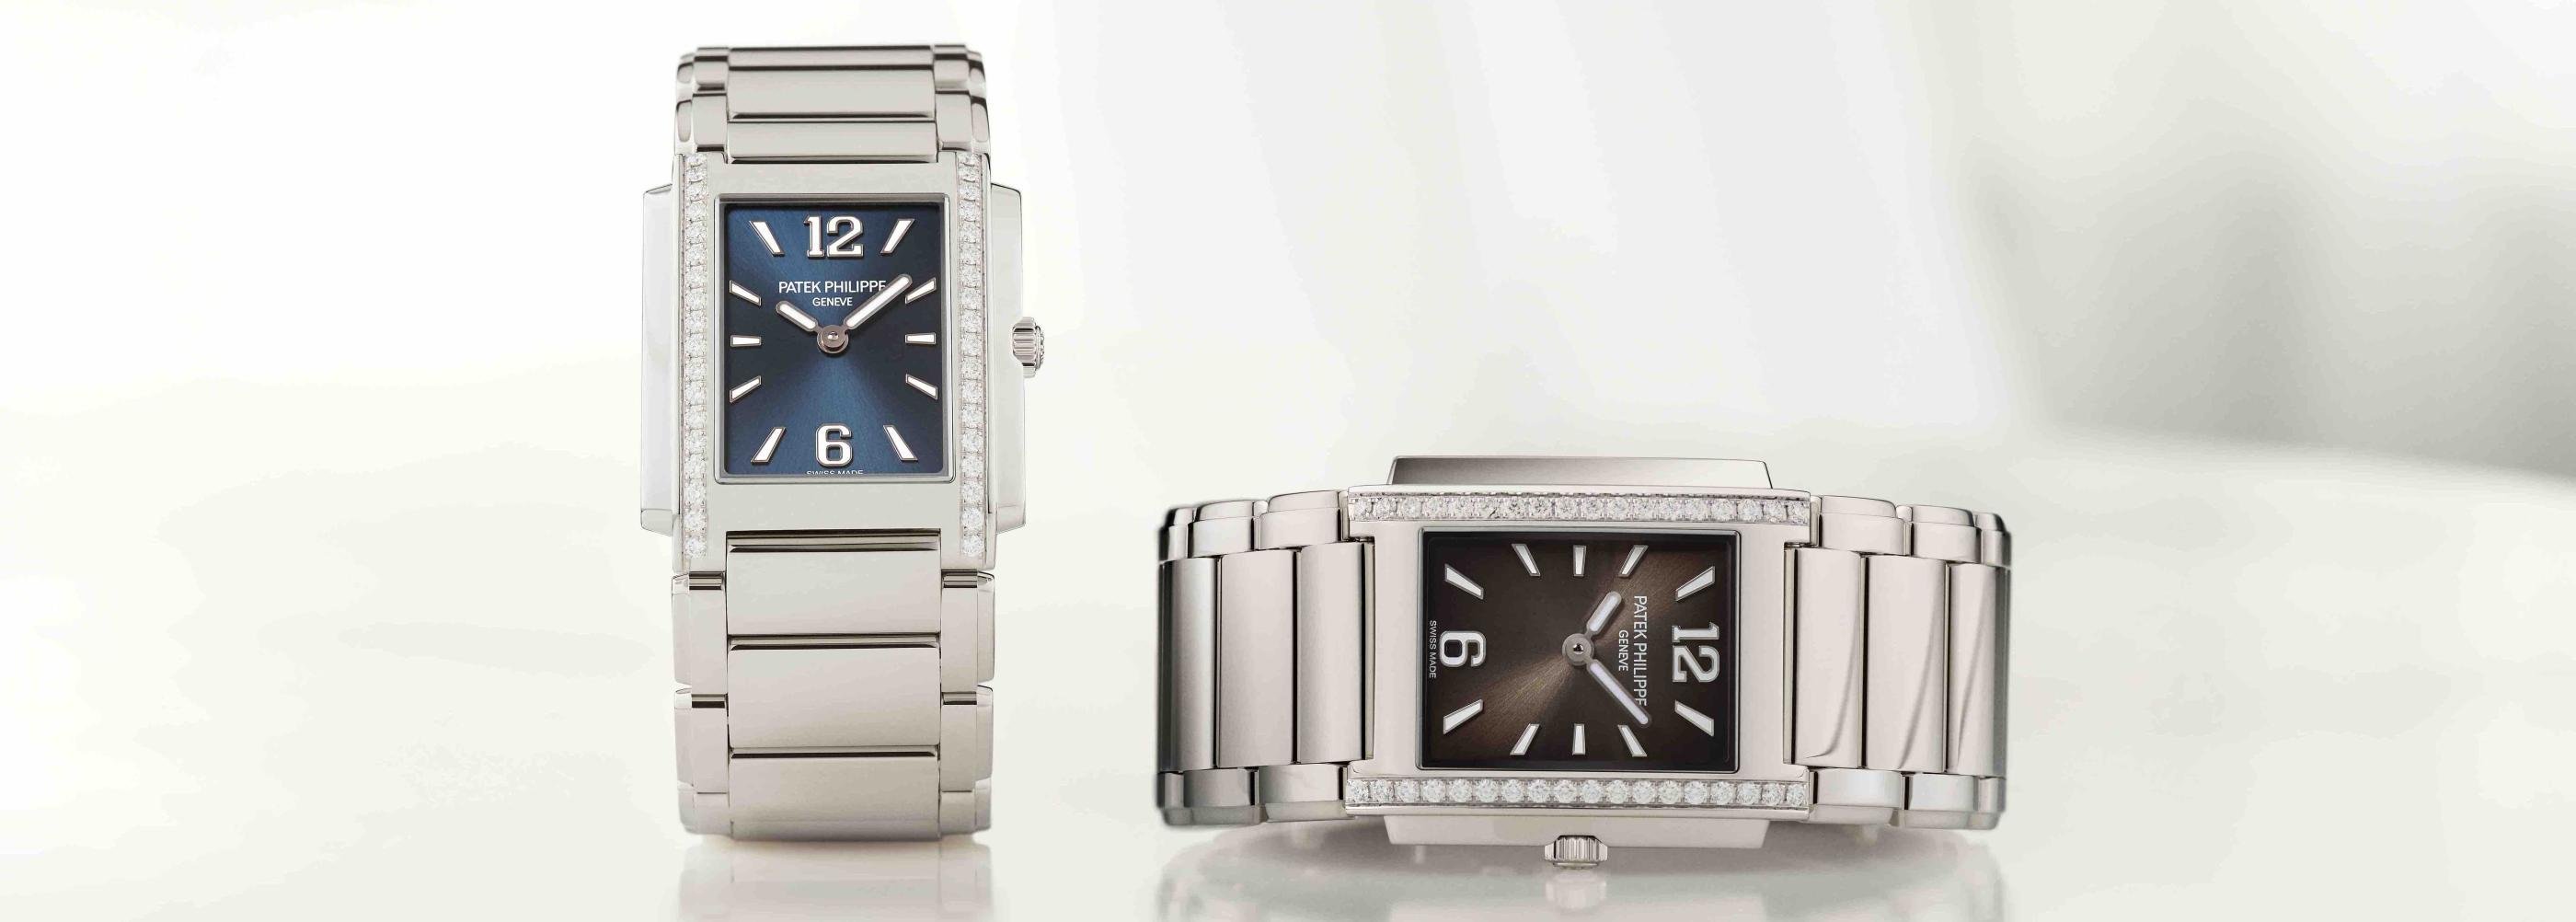 Patek Philippe: a new face for the Twenty~4 line